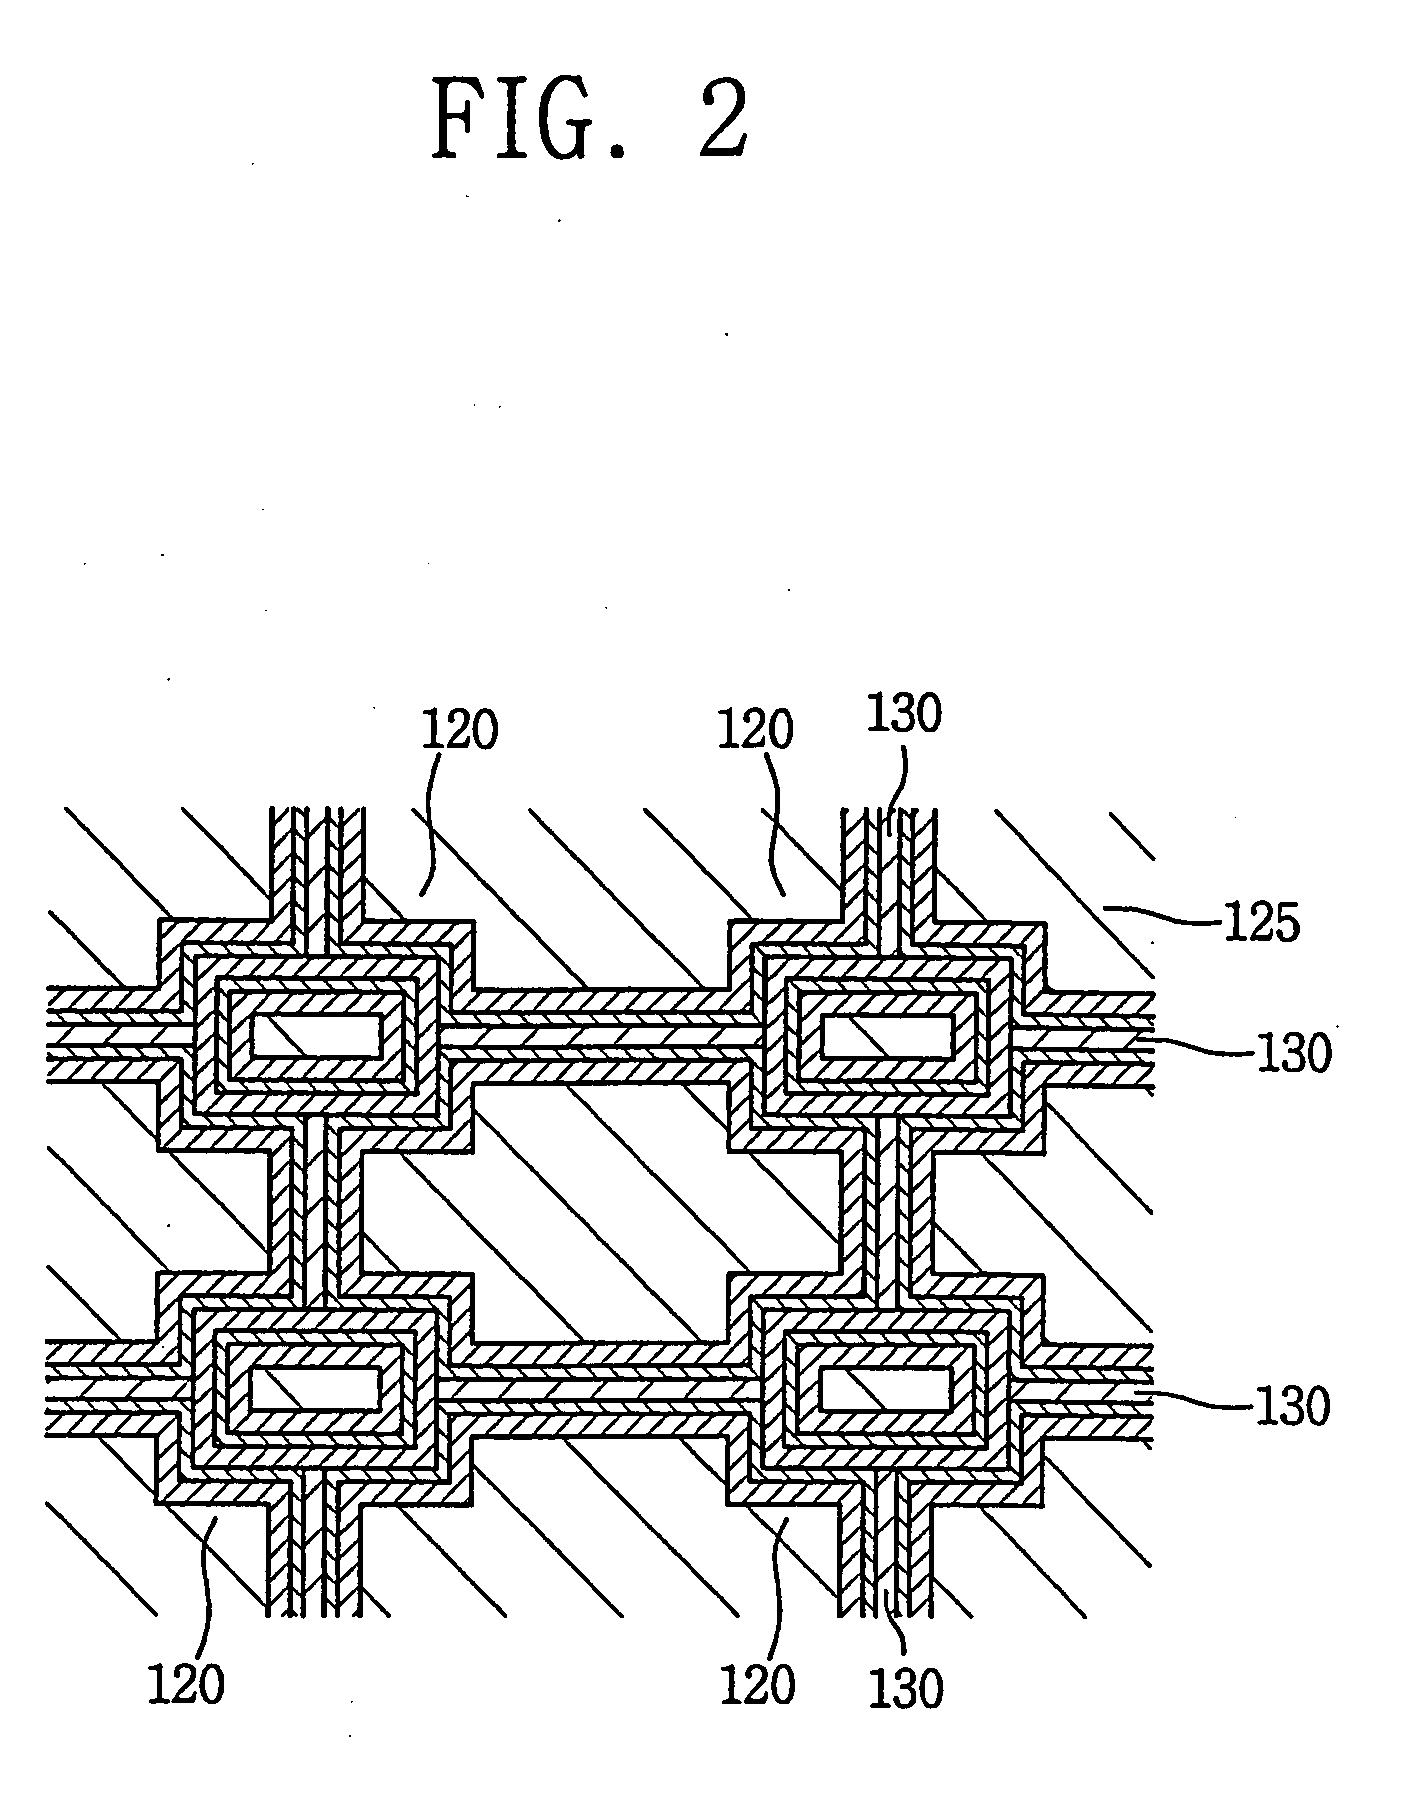 Semiconductor device including a capacitor having improved structural stability and enhanced capacitance, and method of manufacturing the semiconductor device